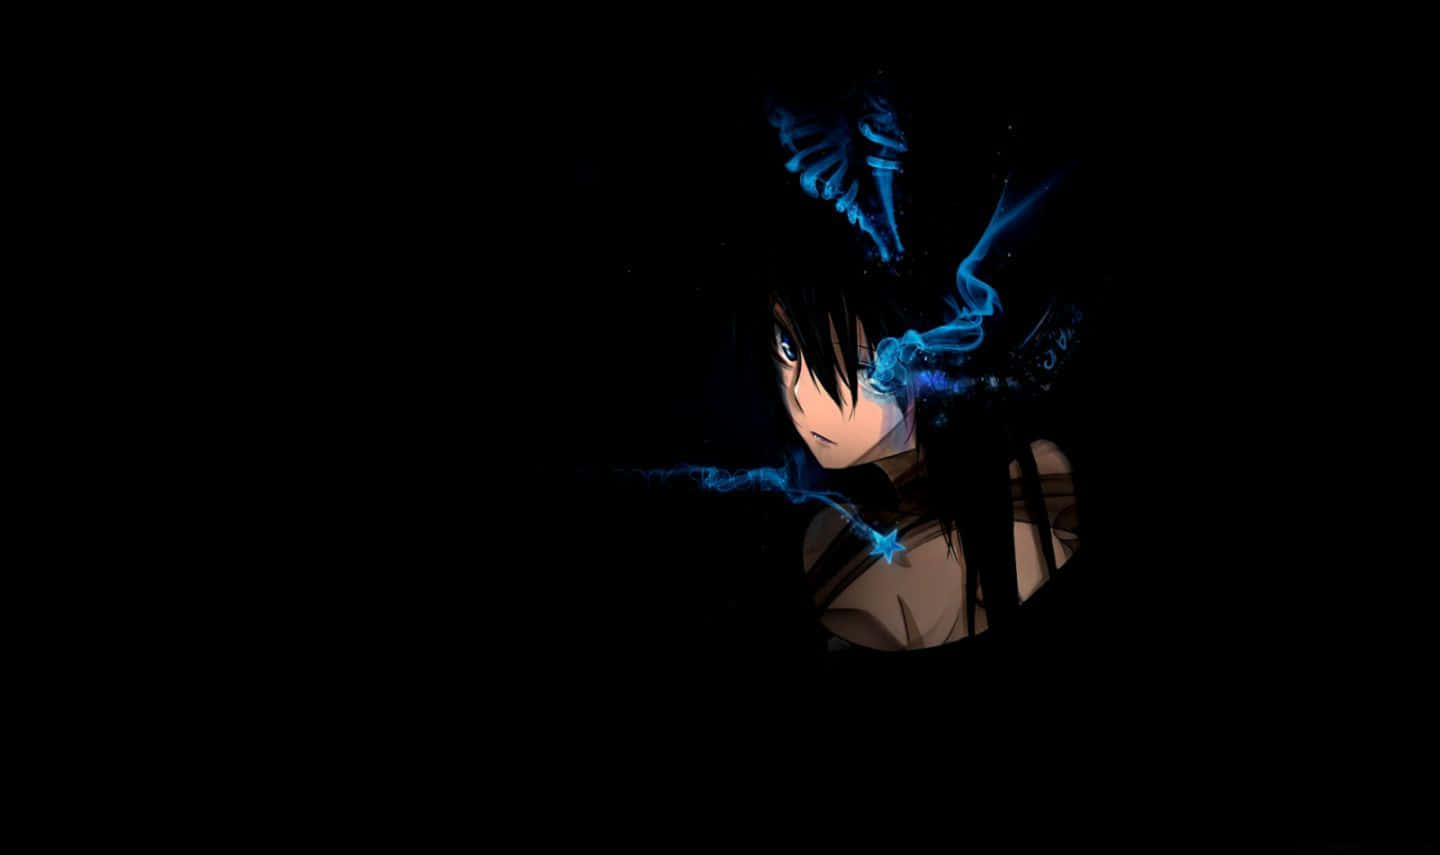 Cute Dark Anime Girl With Blue Flame Wallpaper